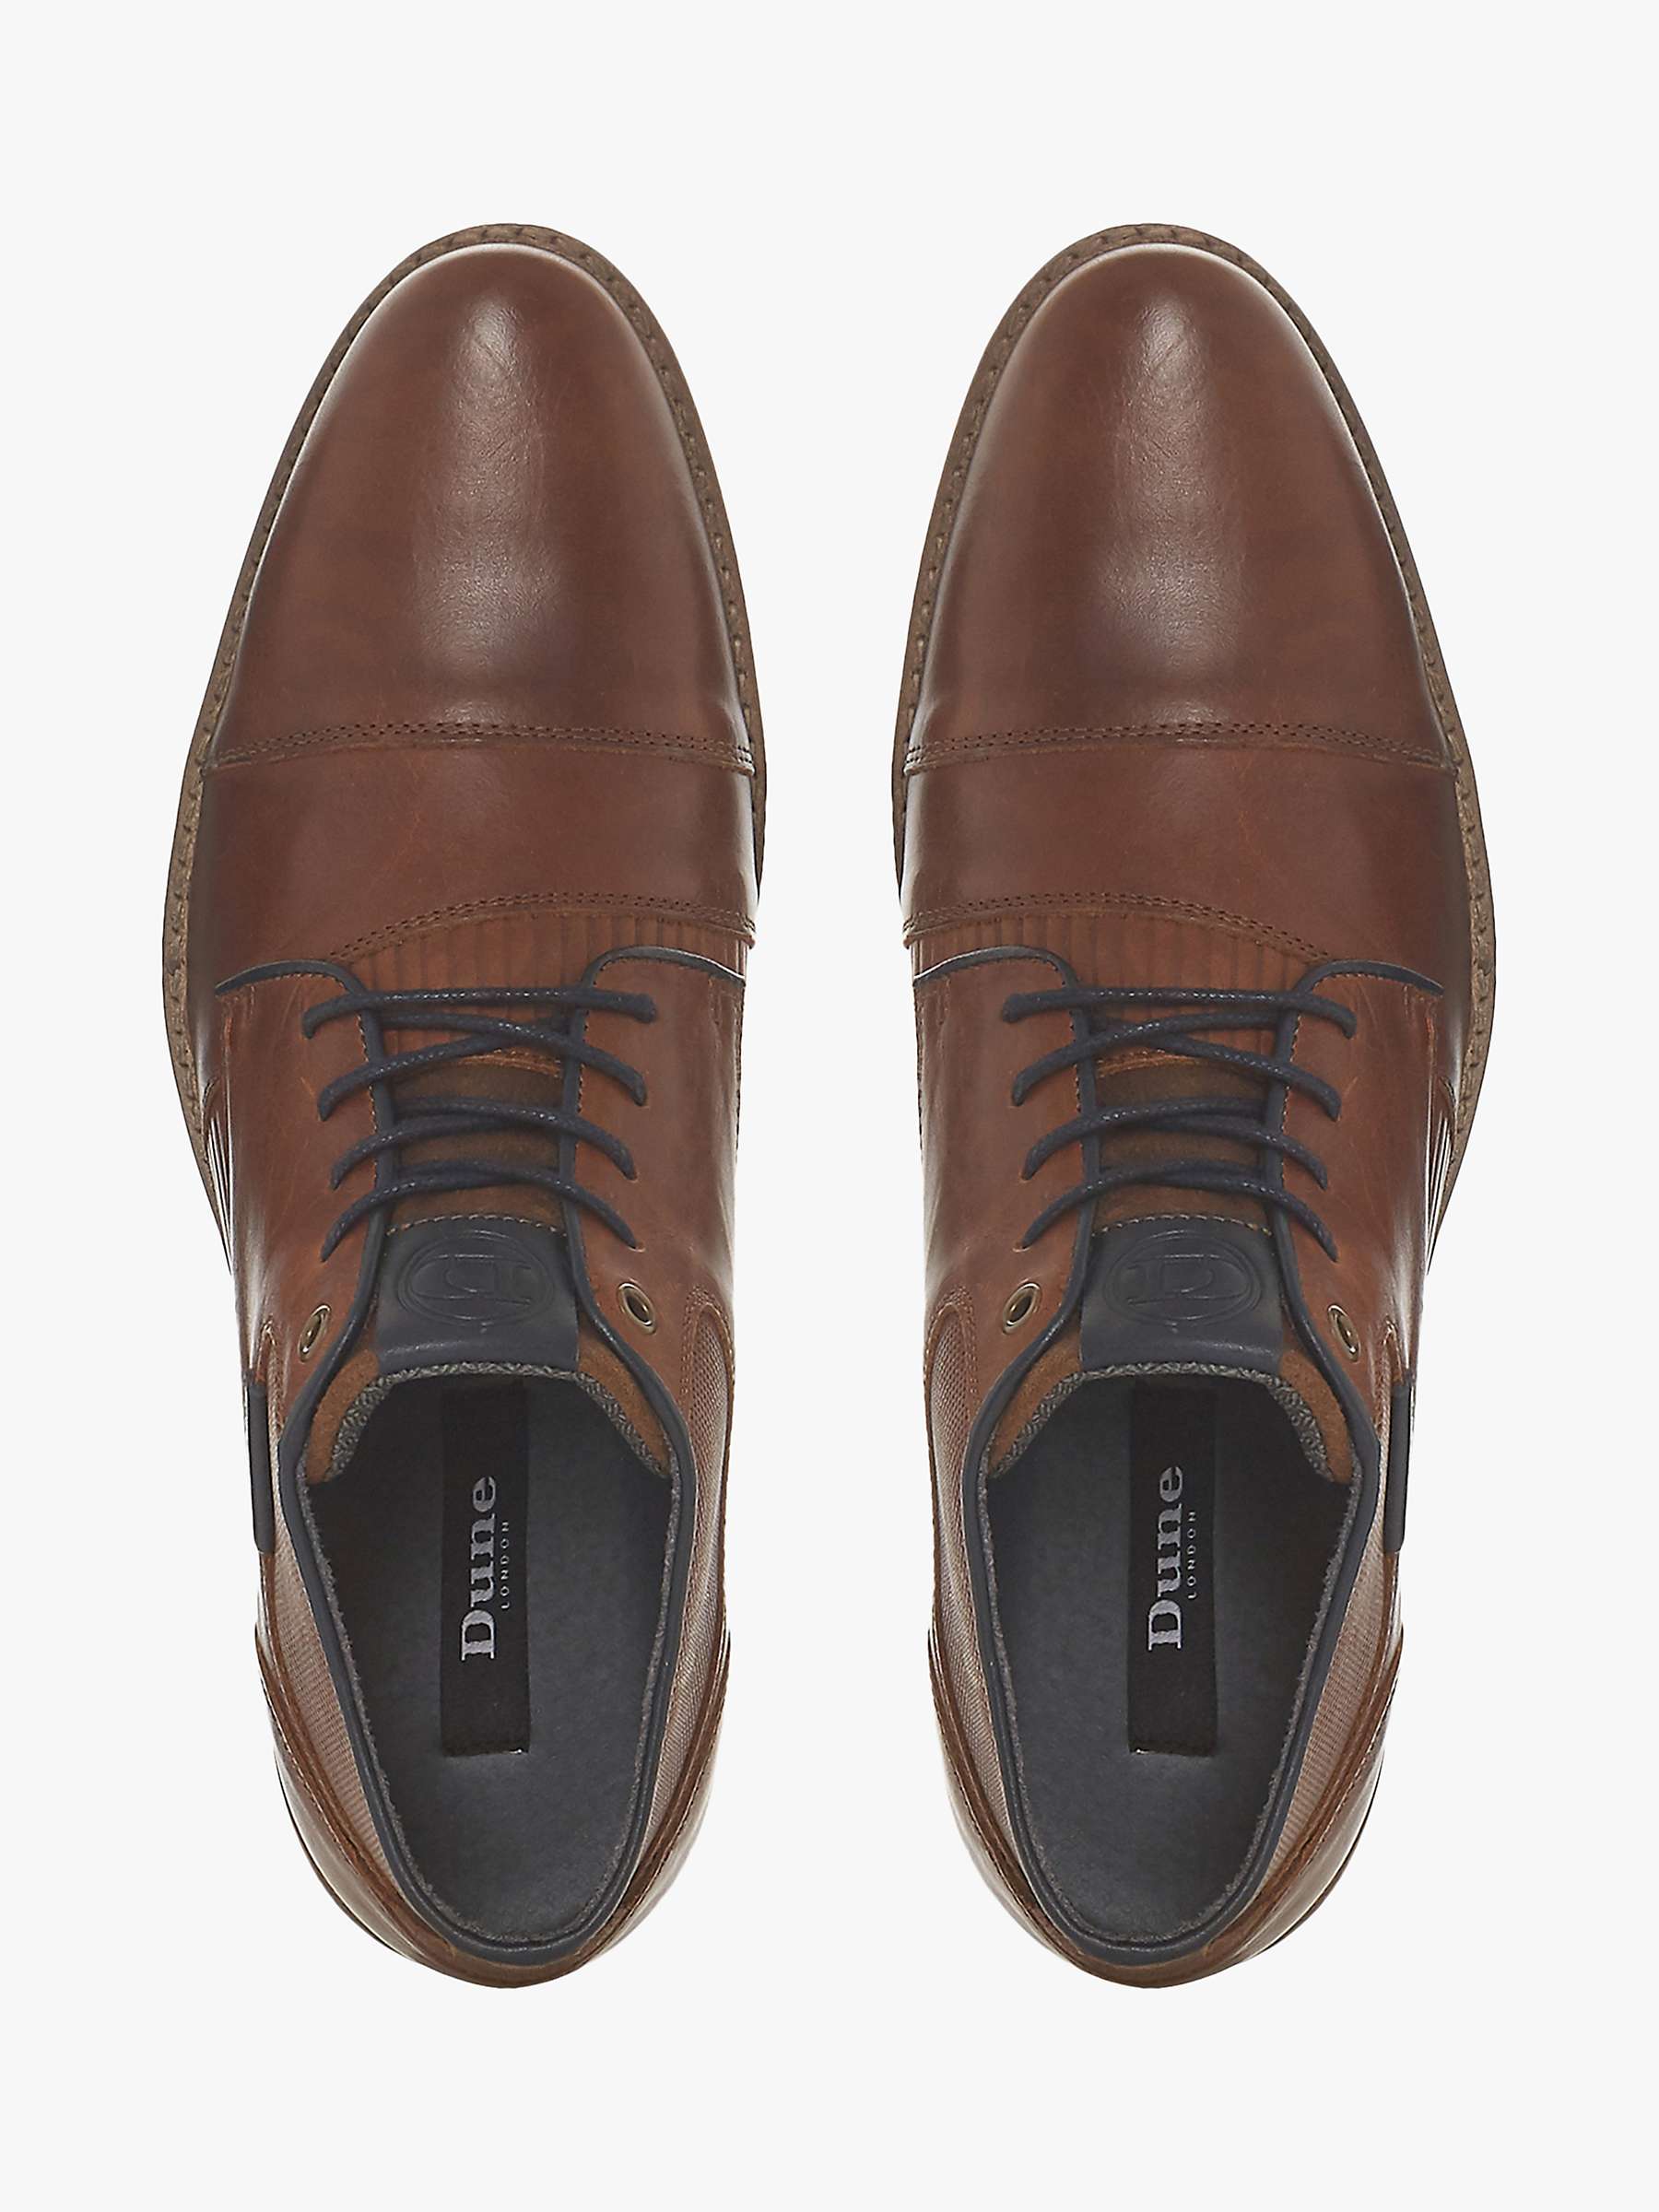 Dune Chigwell Chukka Boots, Tan Leather at John Lewis & Partners